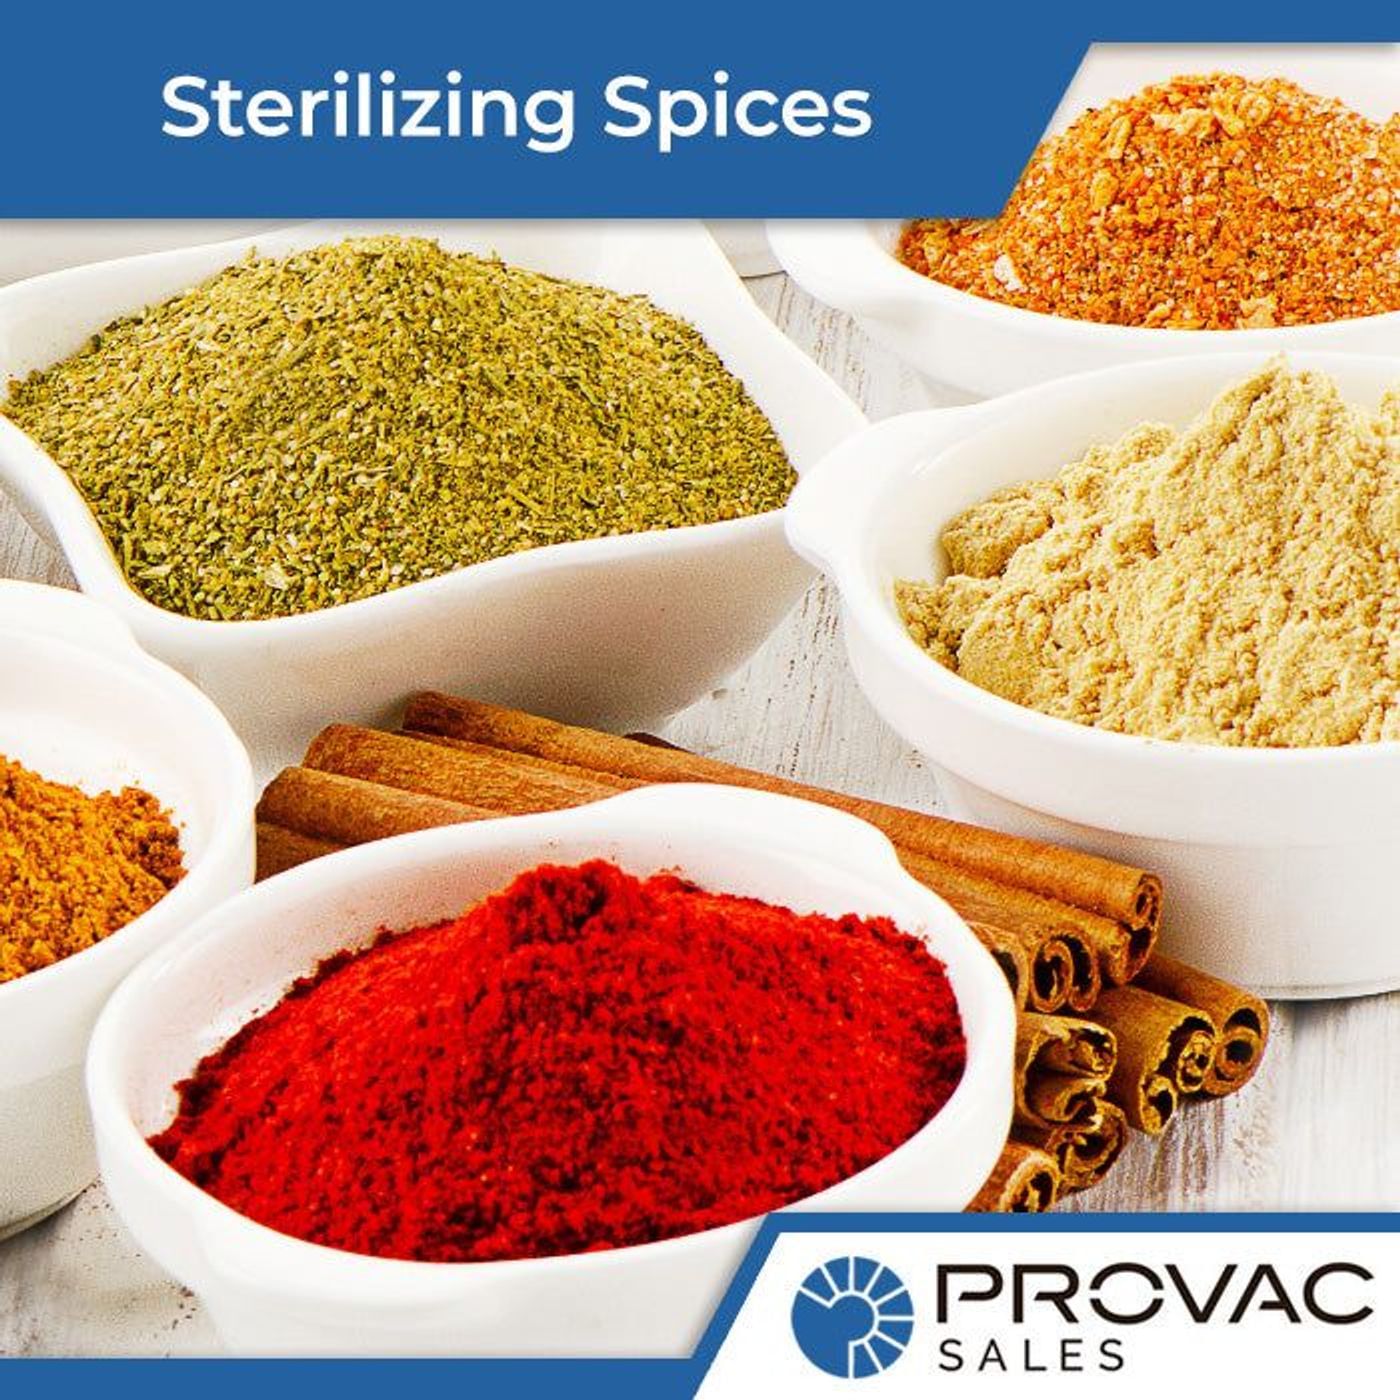 How to Sterilize Spices to Kill Microorganisms with Vacuum Pumps